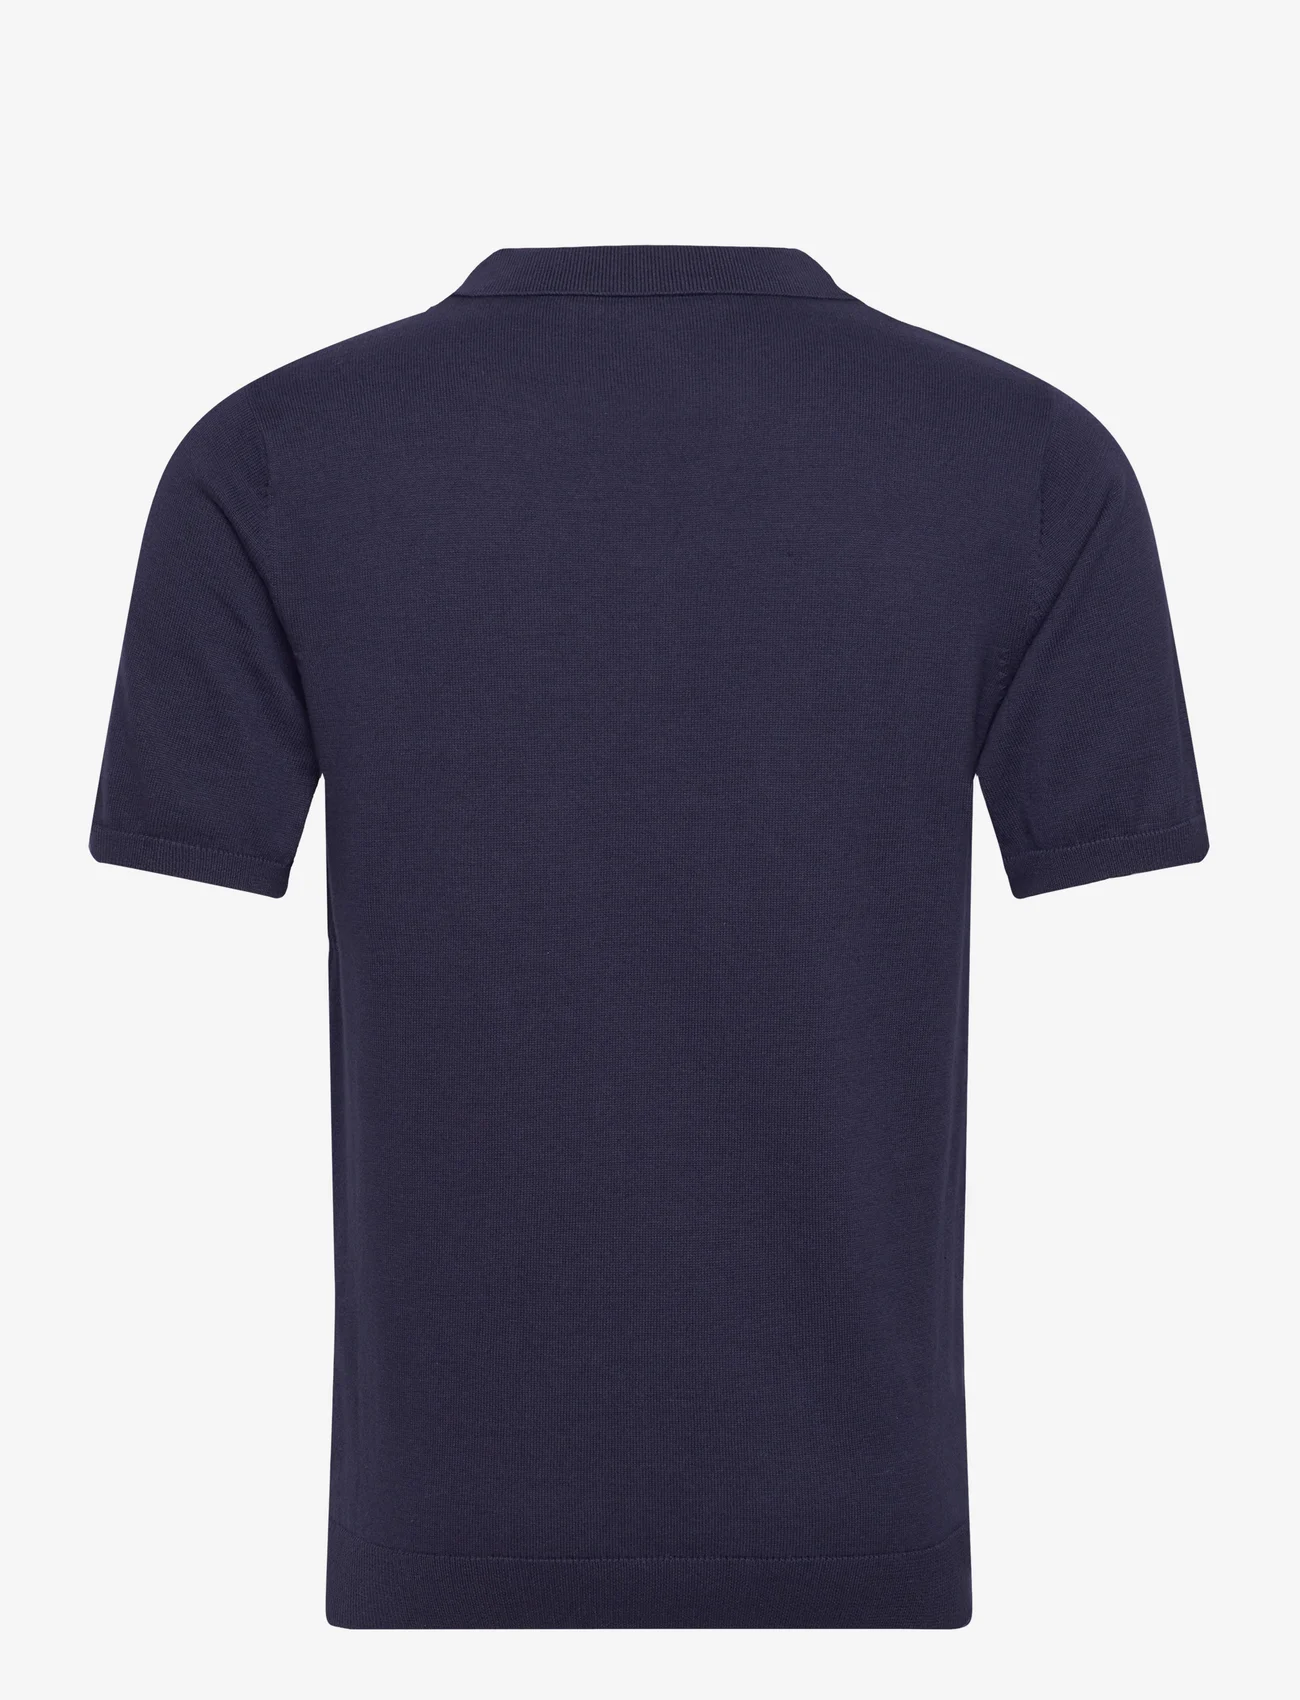 French Connection - RESORT SS POLO - mehed - navy - 1